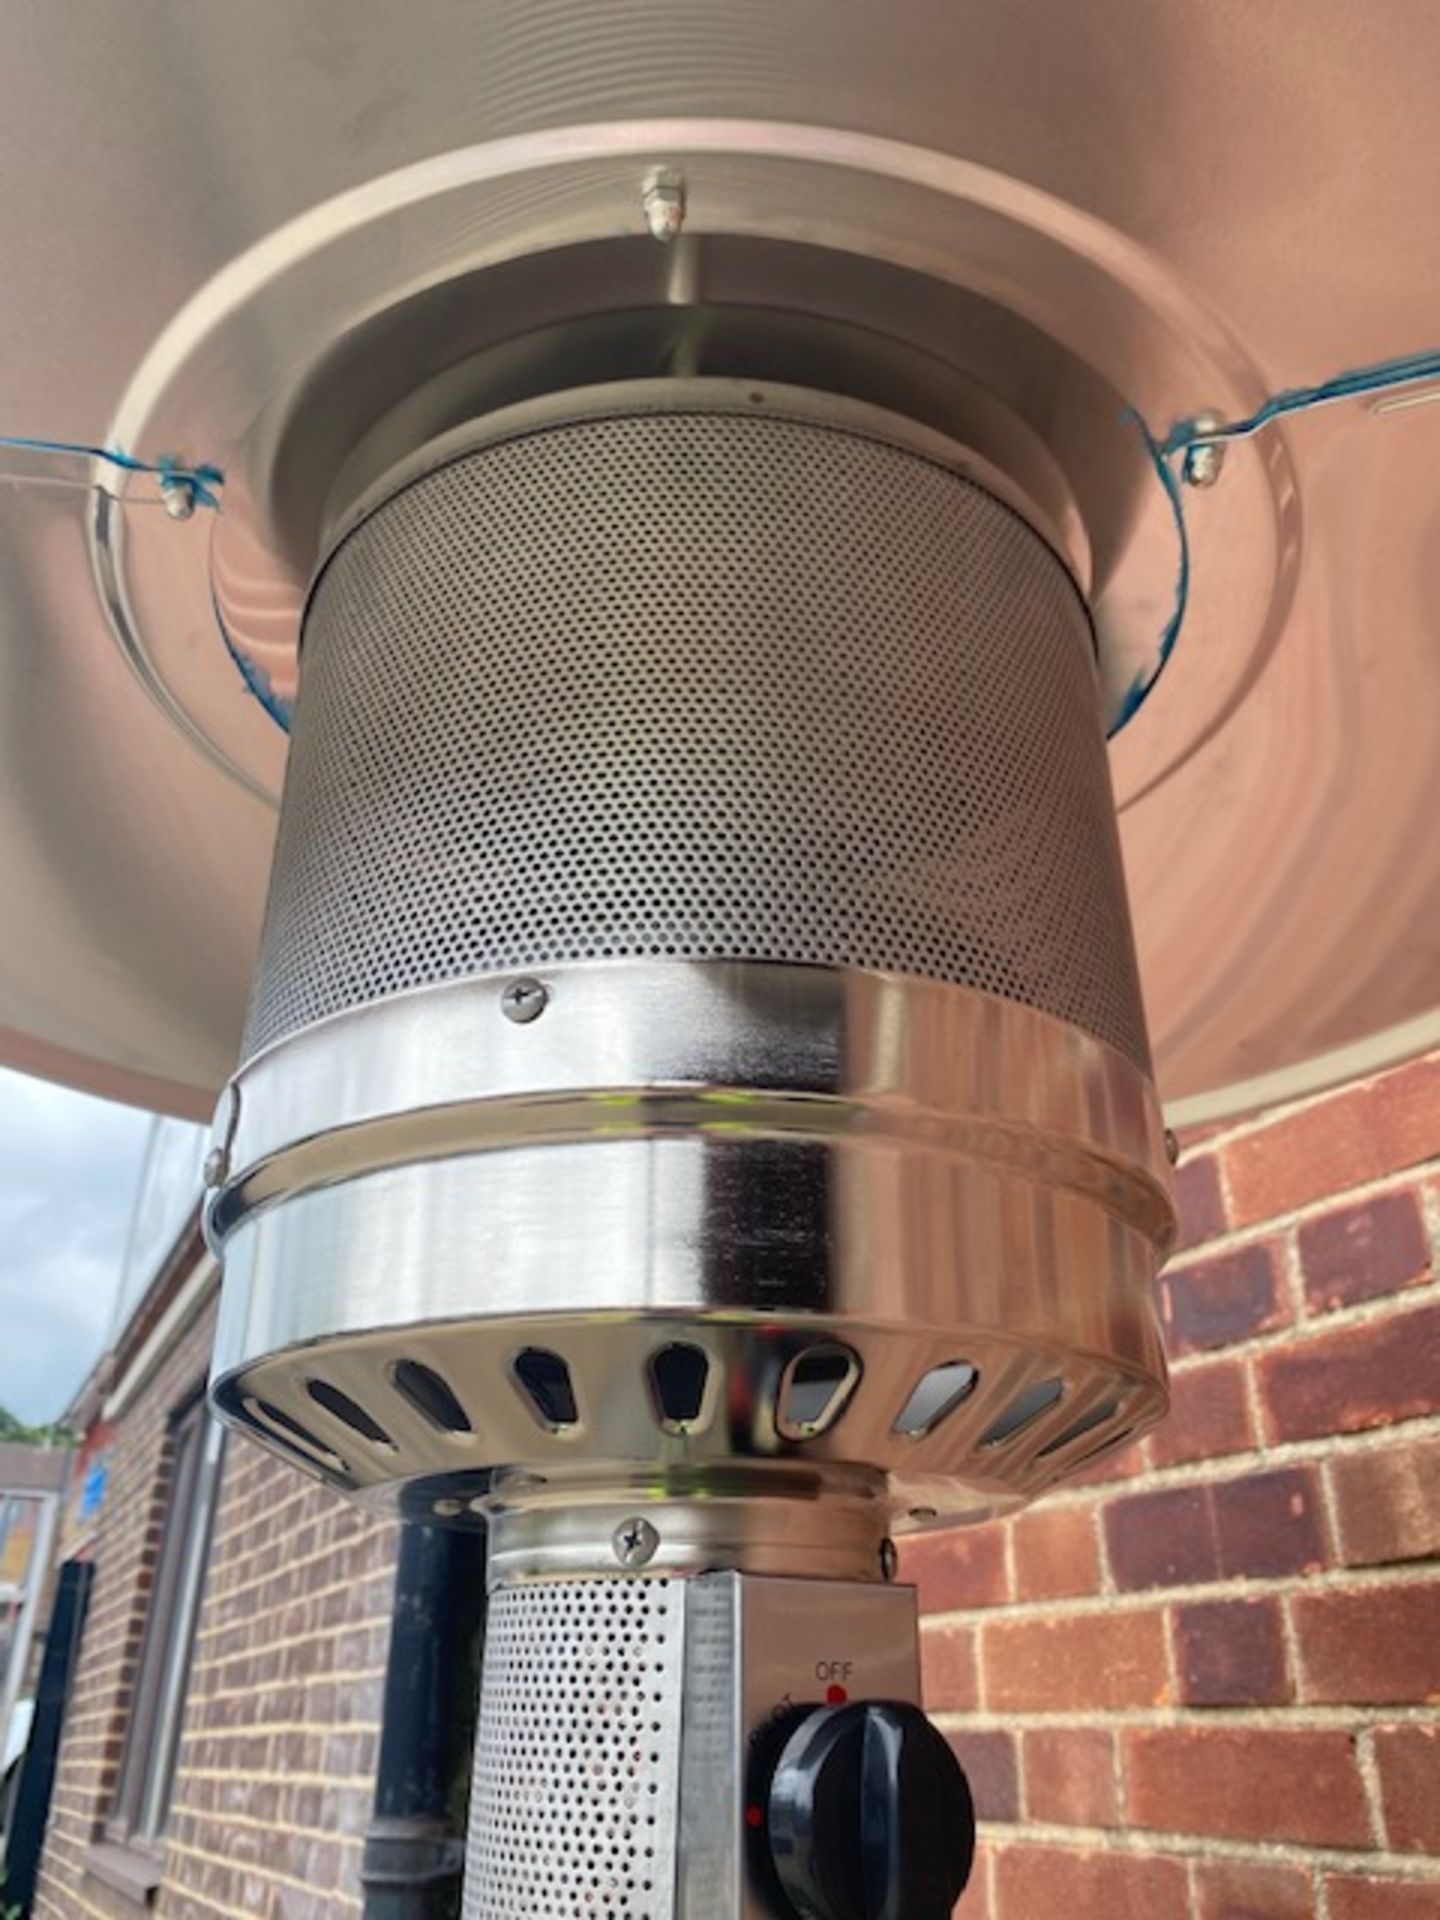 + VAT Brand New Chelsea Garden Company Garden Patio Heater With Cover - Item Is Available From - Image 6 of 9